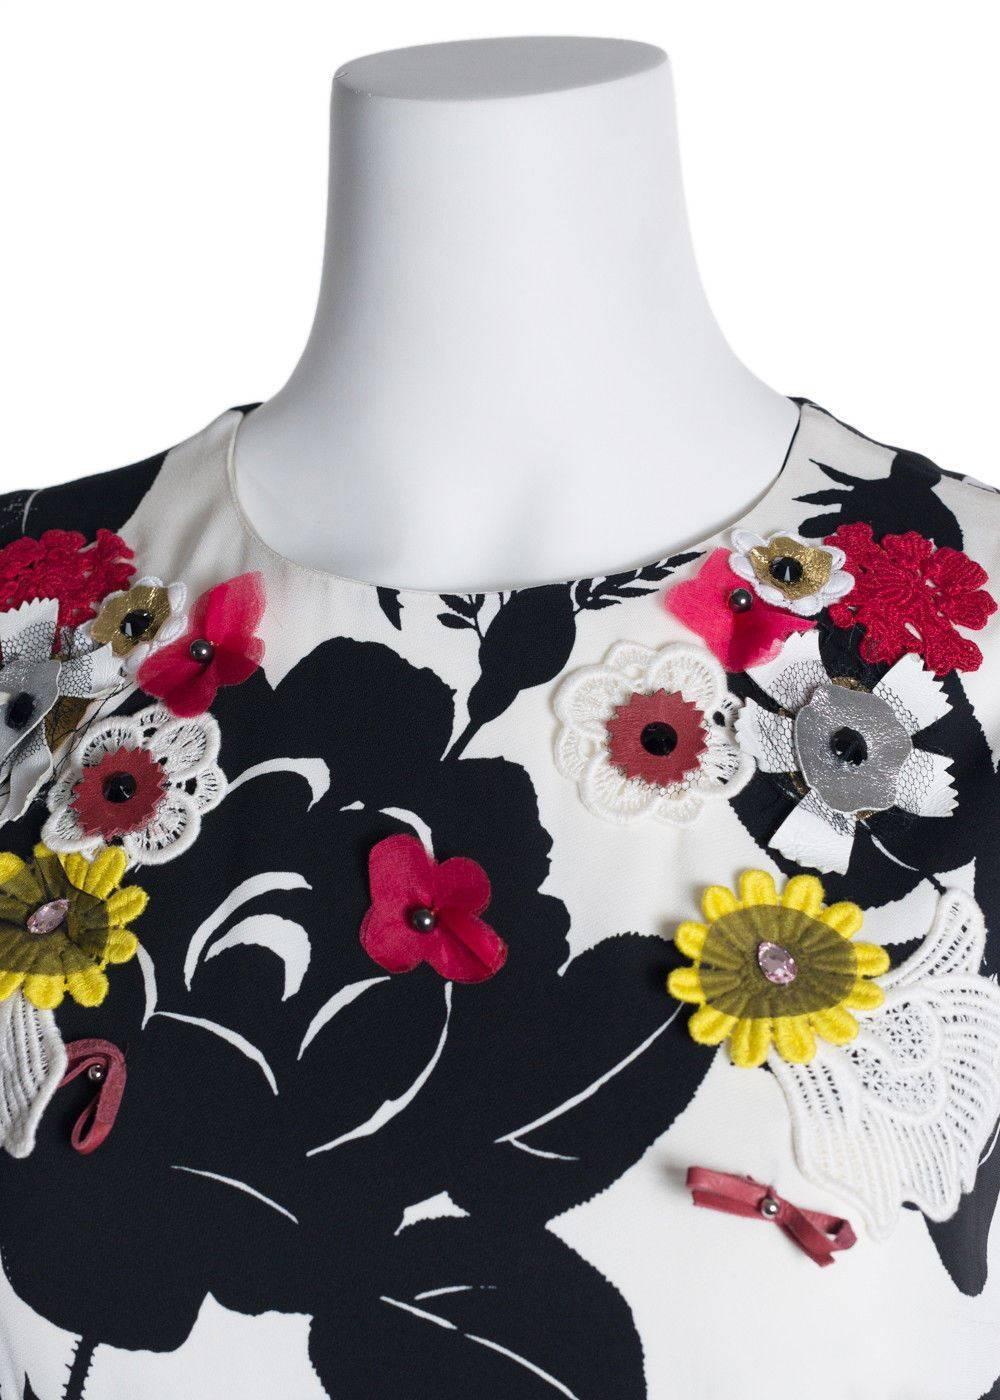 Dolce & Gabbana Black and White Floral Embroidered Sleeveless Dress 1